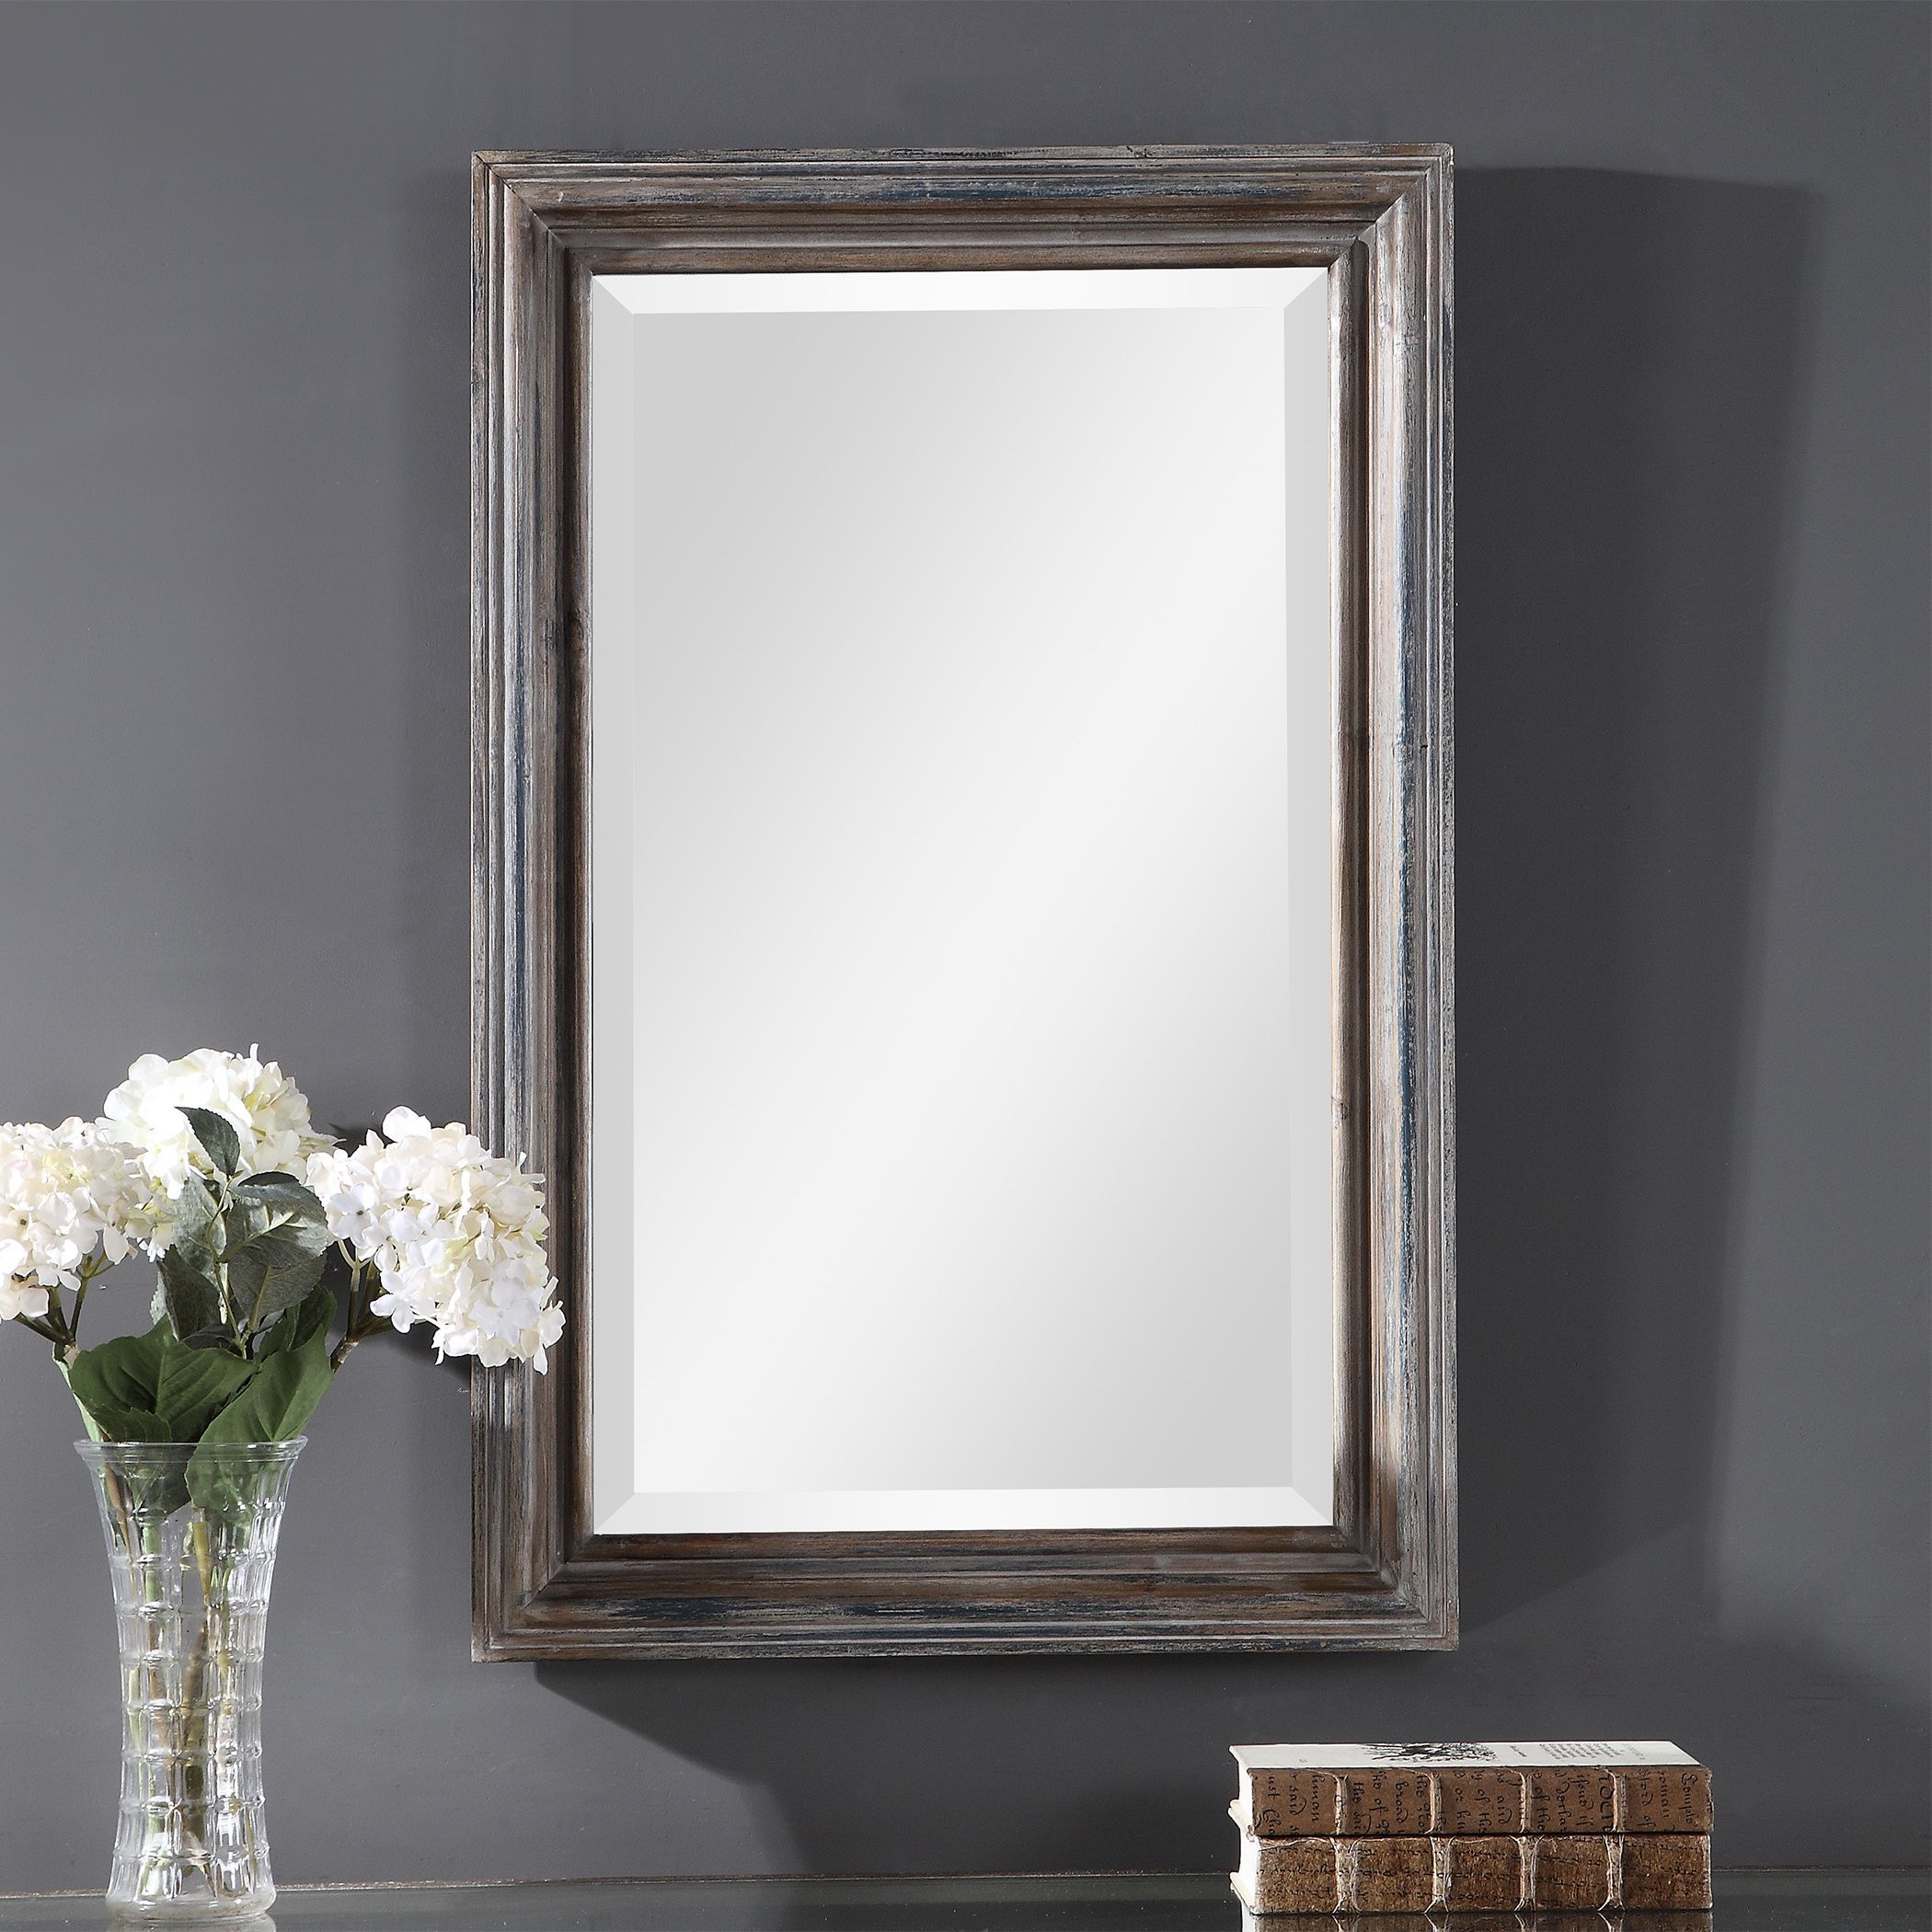 Uttermost Gulliver Distressed Blue Vanity Wall Mirror Solid Wood With Kristy Rectangular Beveled Vanity Mirrors In Distressed (View 1 of 15)